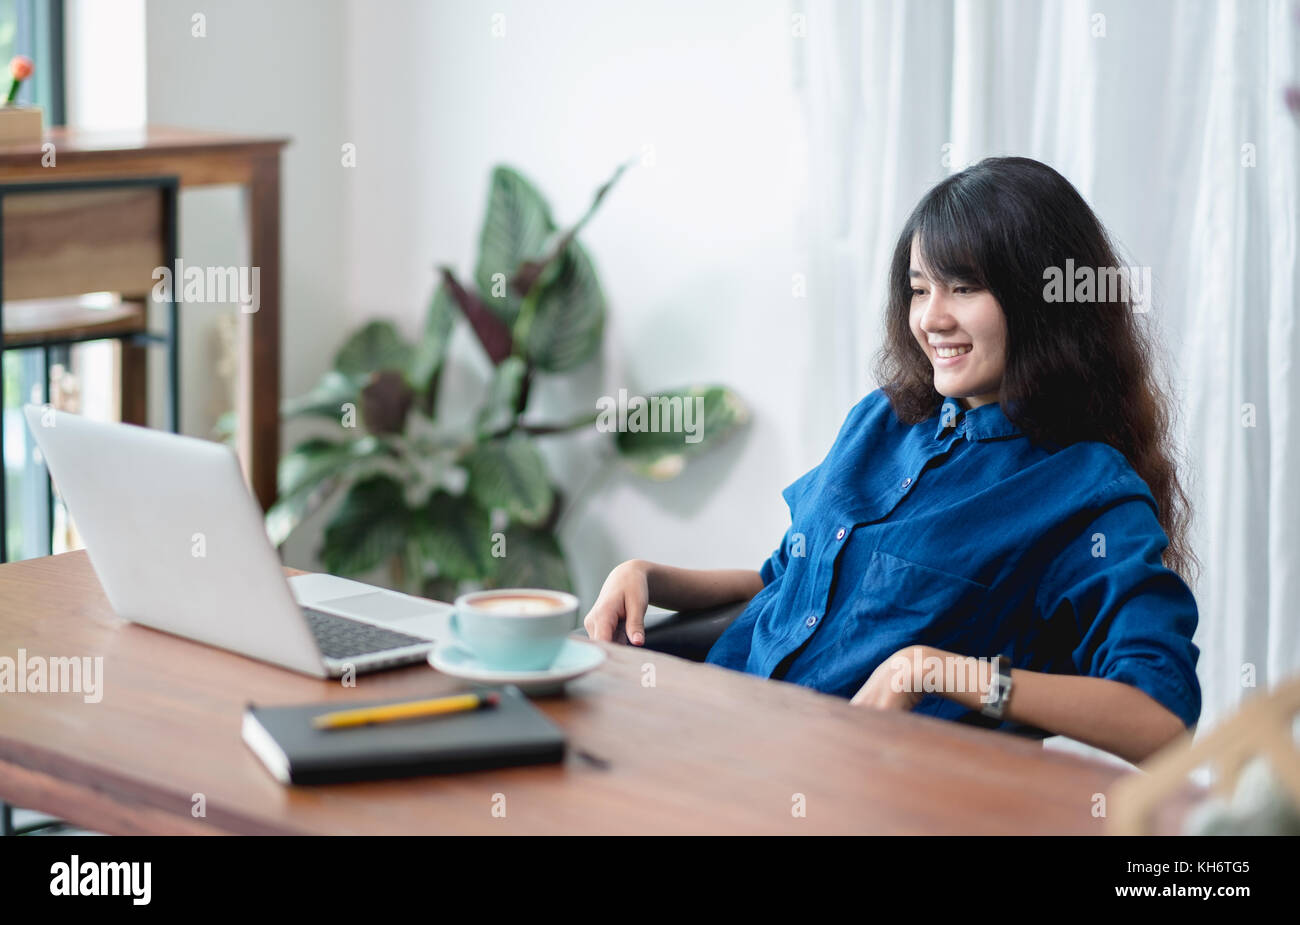 asia woman relax after working,female watching live streaming video on laptop drink coffee cup on wood table in cafe restaurant,working lifestyle outs Stock Photo